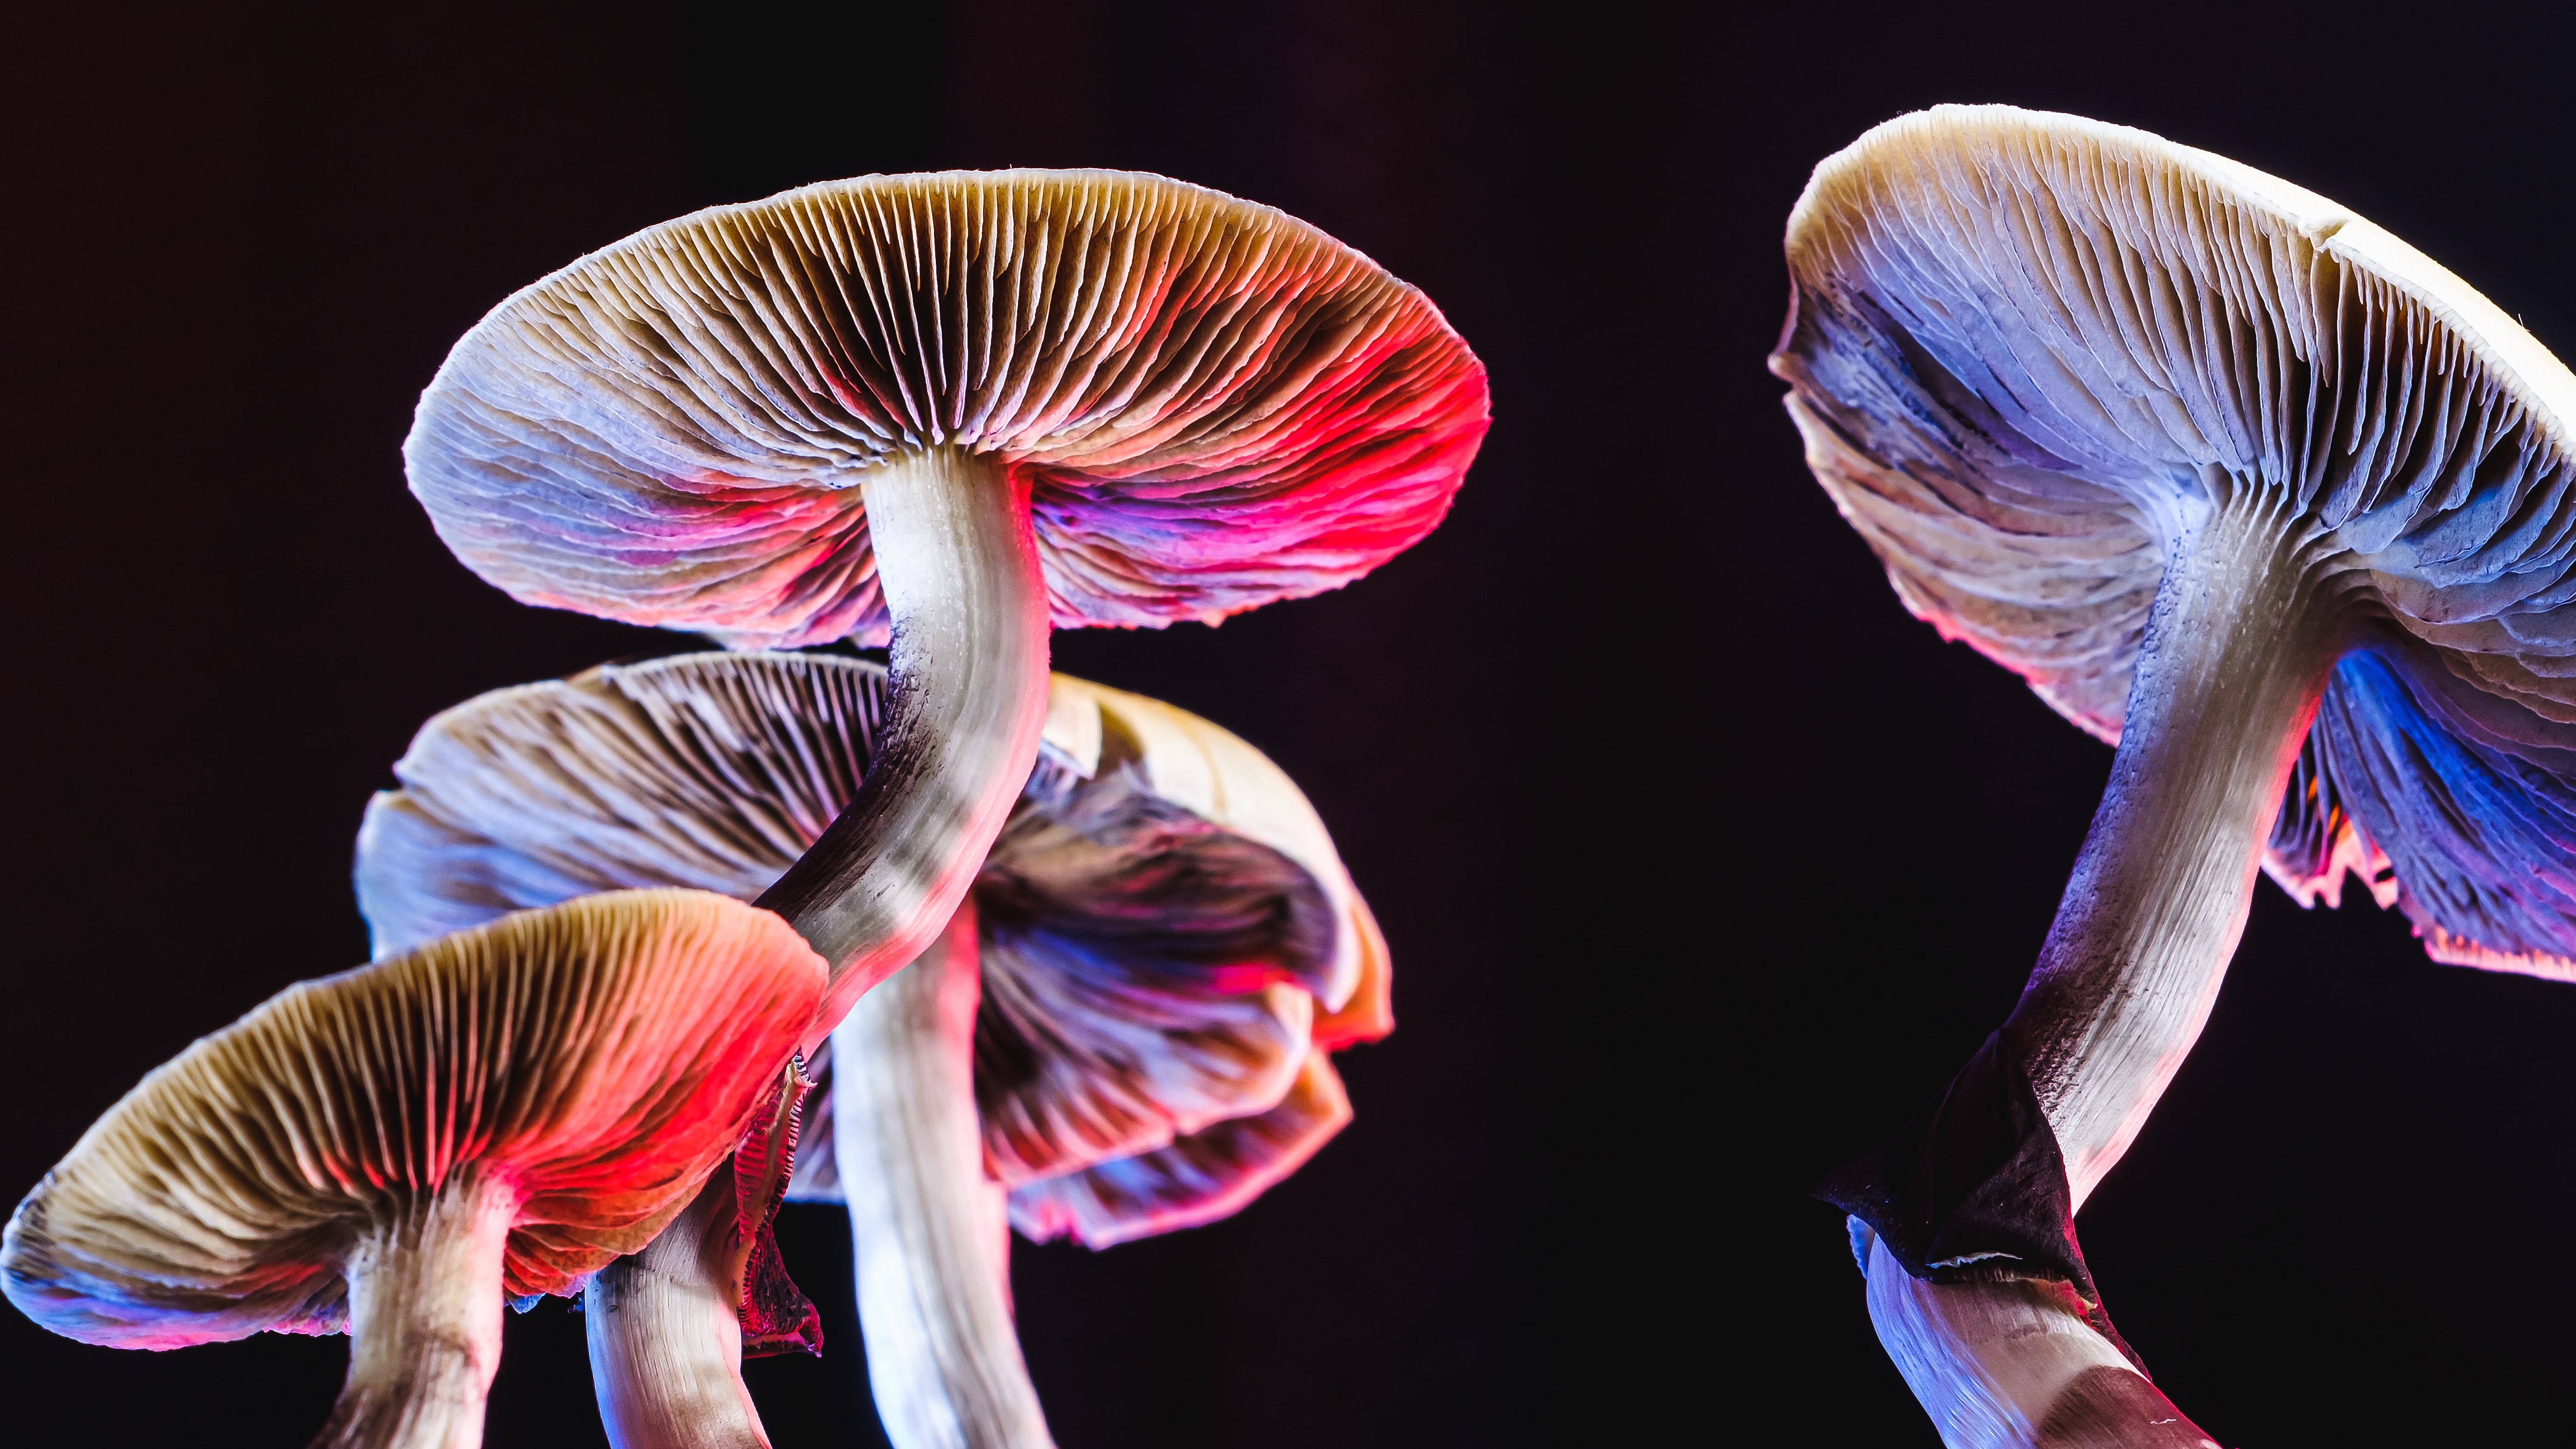 100 Fungi Pictures  Download Free Images on Unsplash